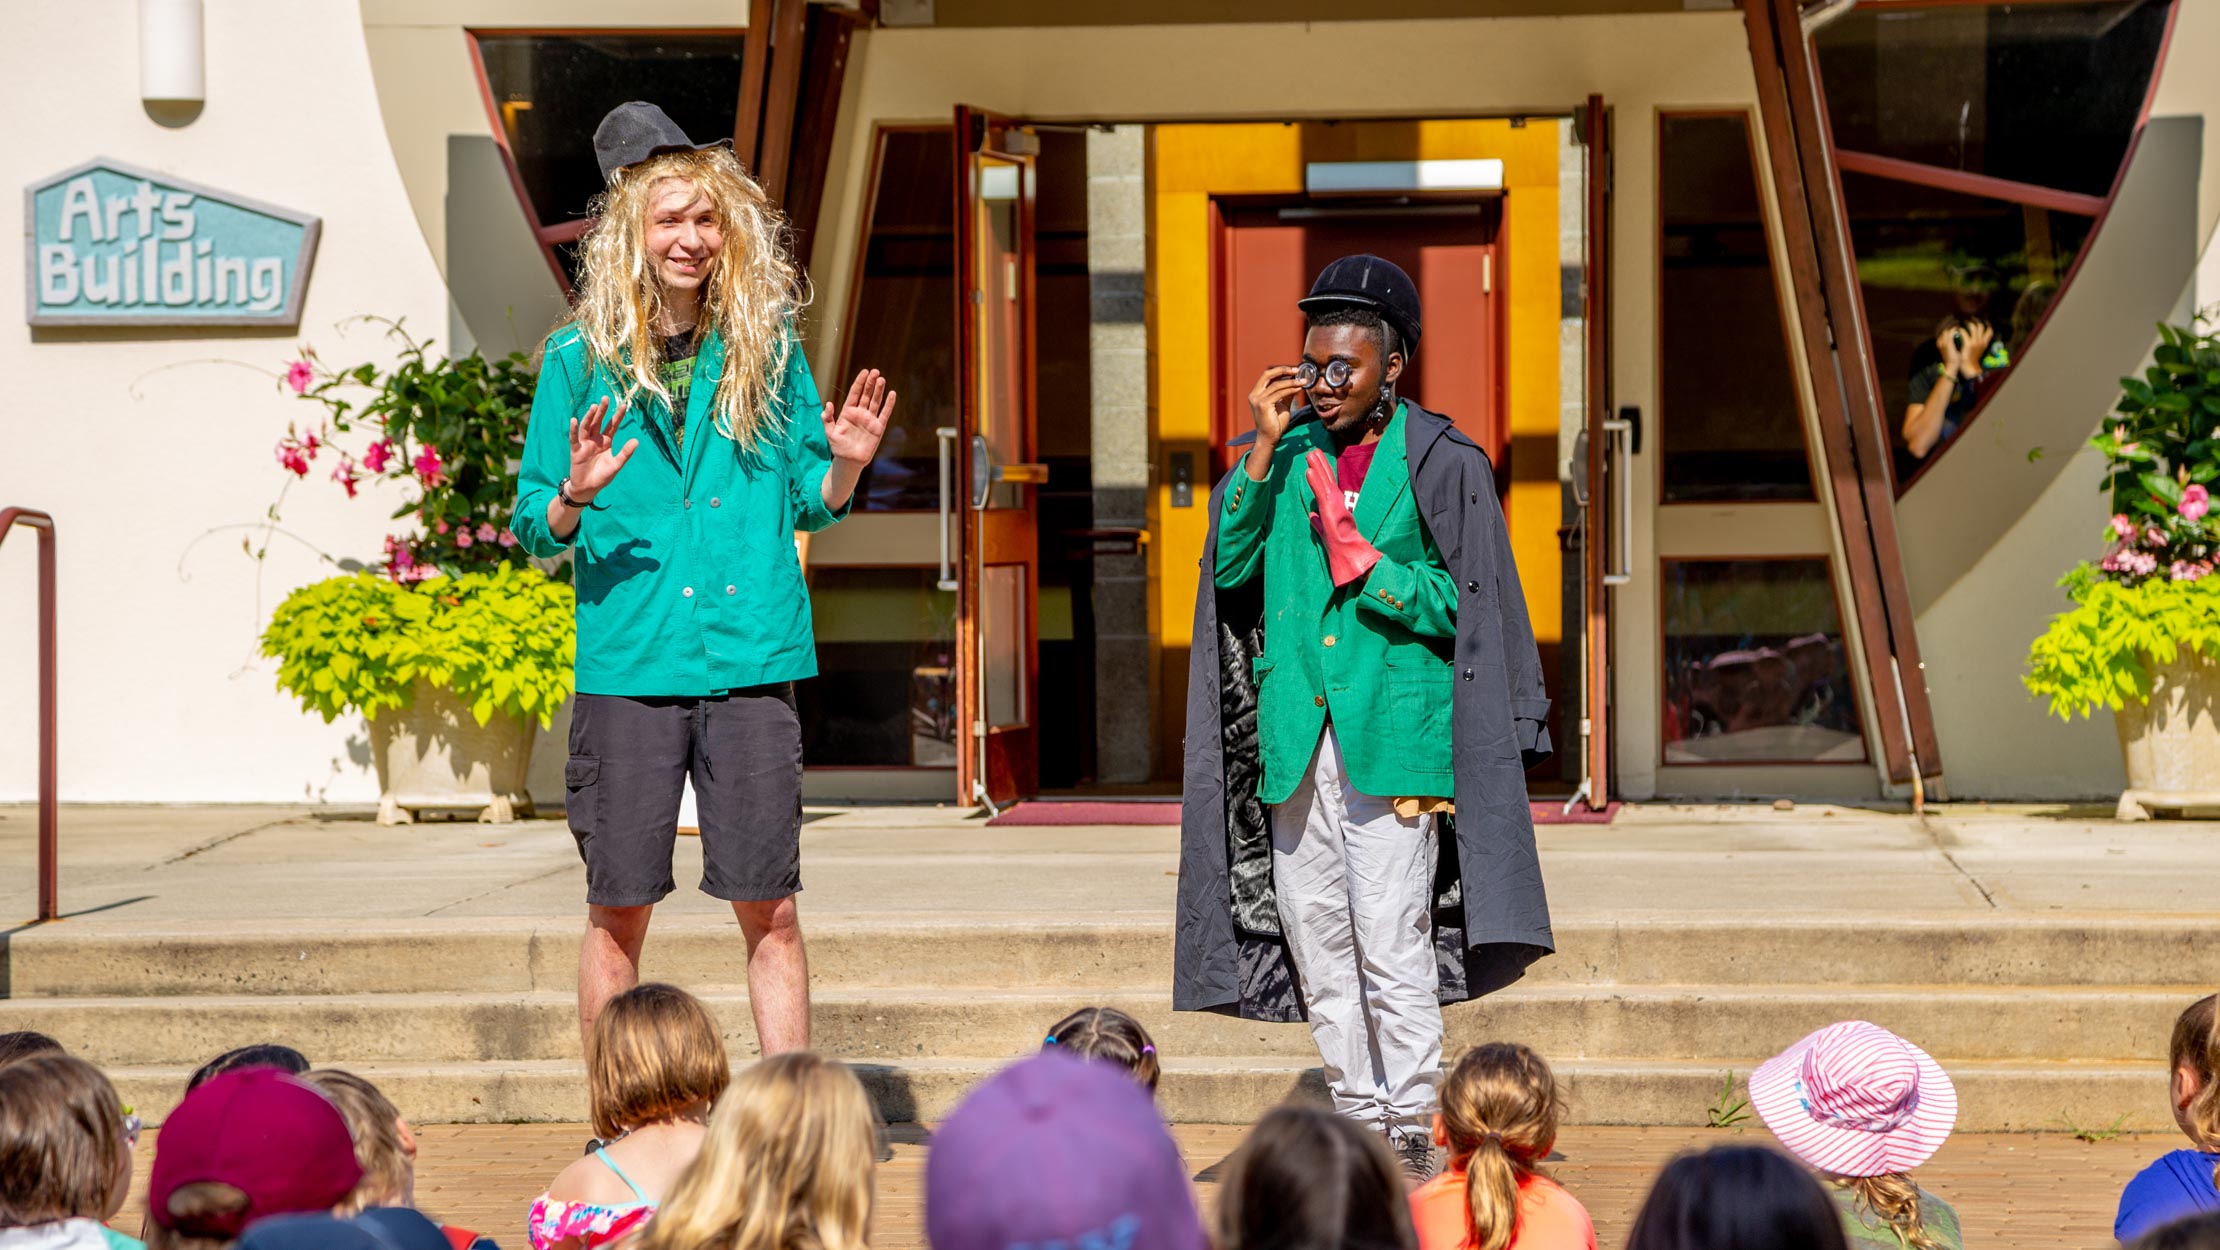 Counselors dressed up performing a skit for campers